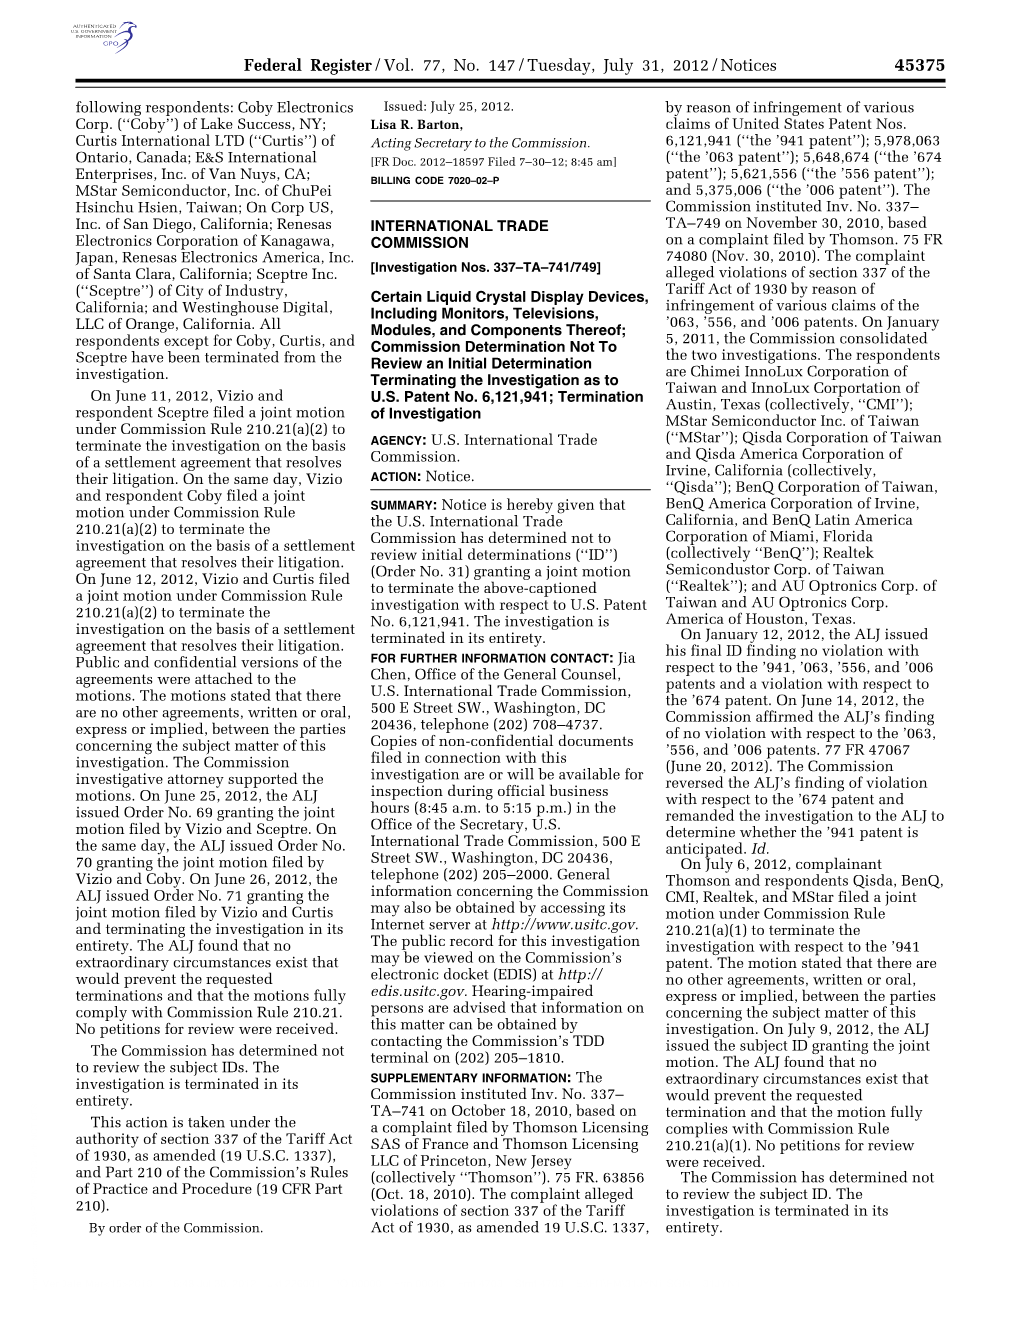 Federal Register/Vol. 77, No. 147/Tuesday, July 31, 2012/Notices